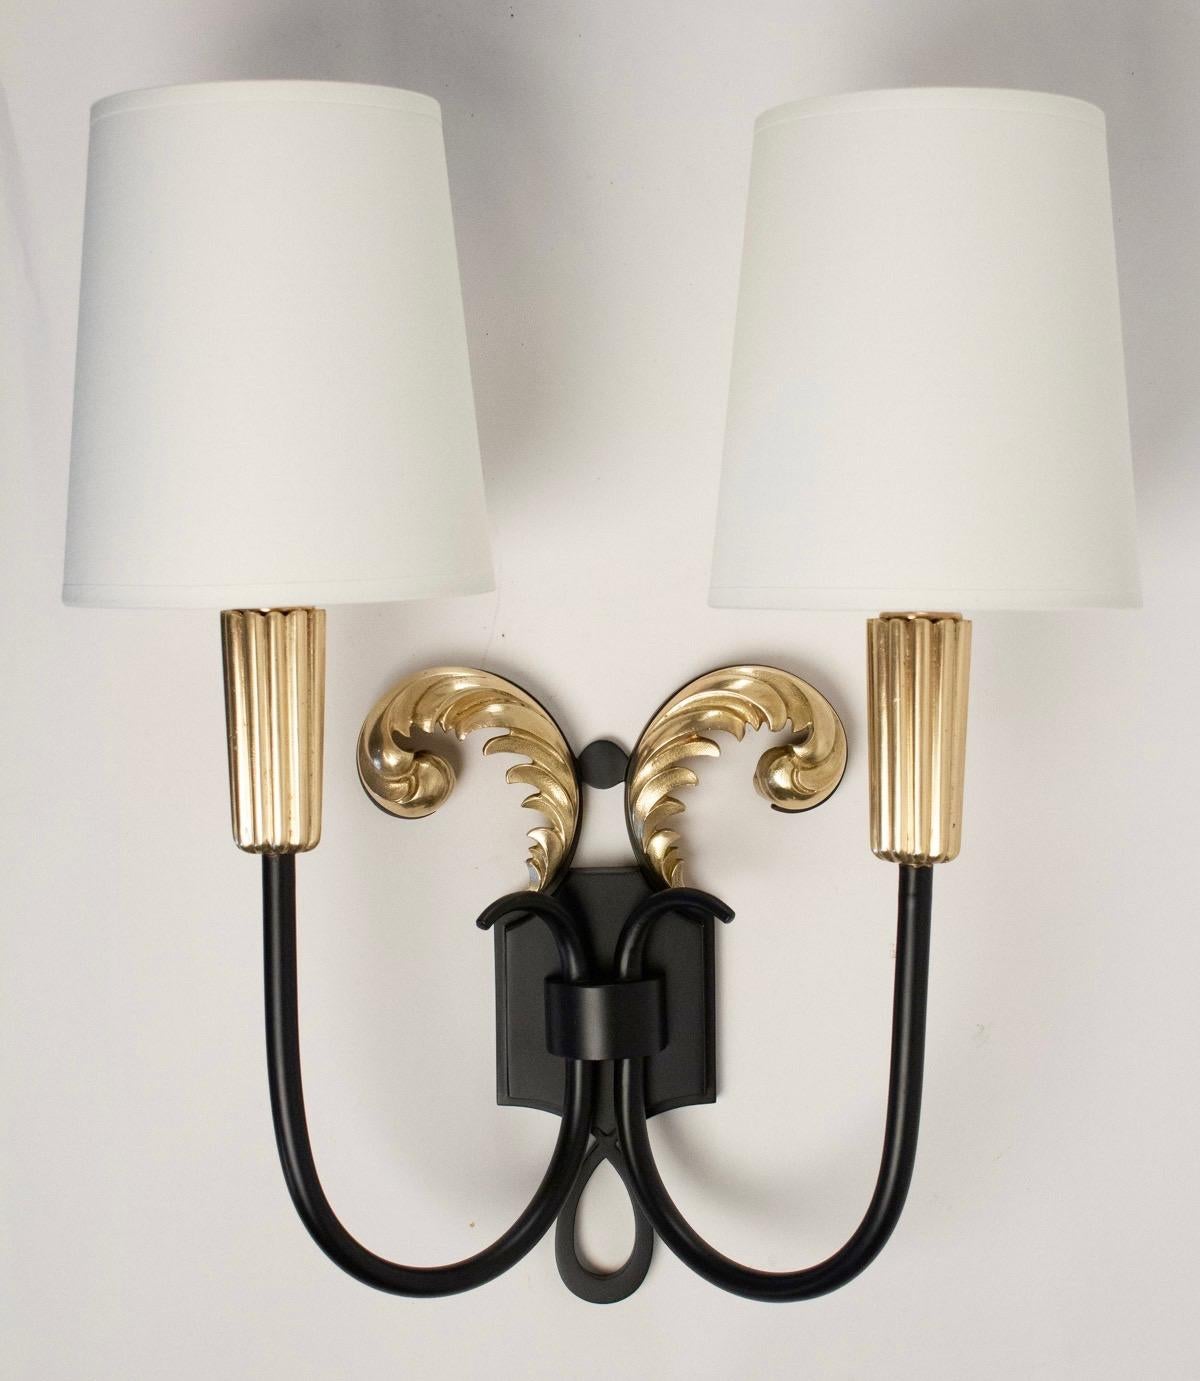 The back plate is adorned with two acanthe leaves made of gilded brass.
The two lighted arms are made of black lacquered iron and ended with brass fluted cups.
Handmade lamp shades of off-white cotton.